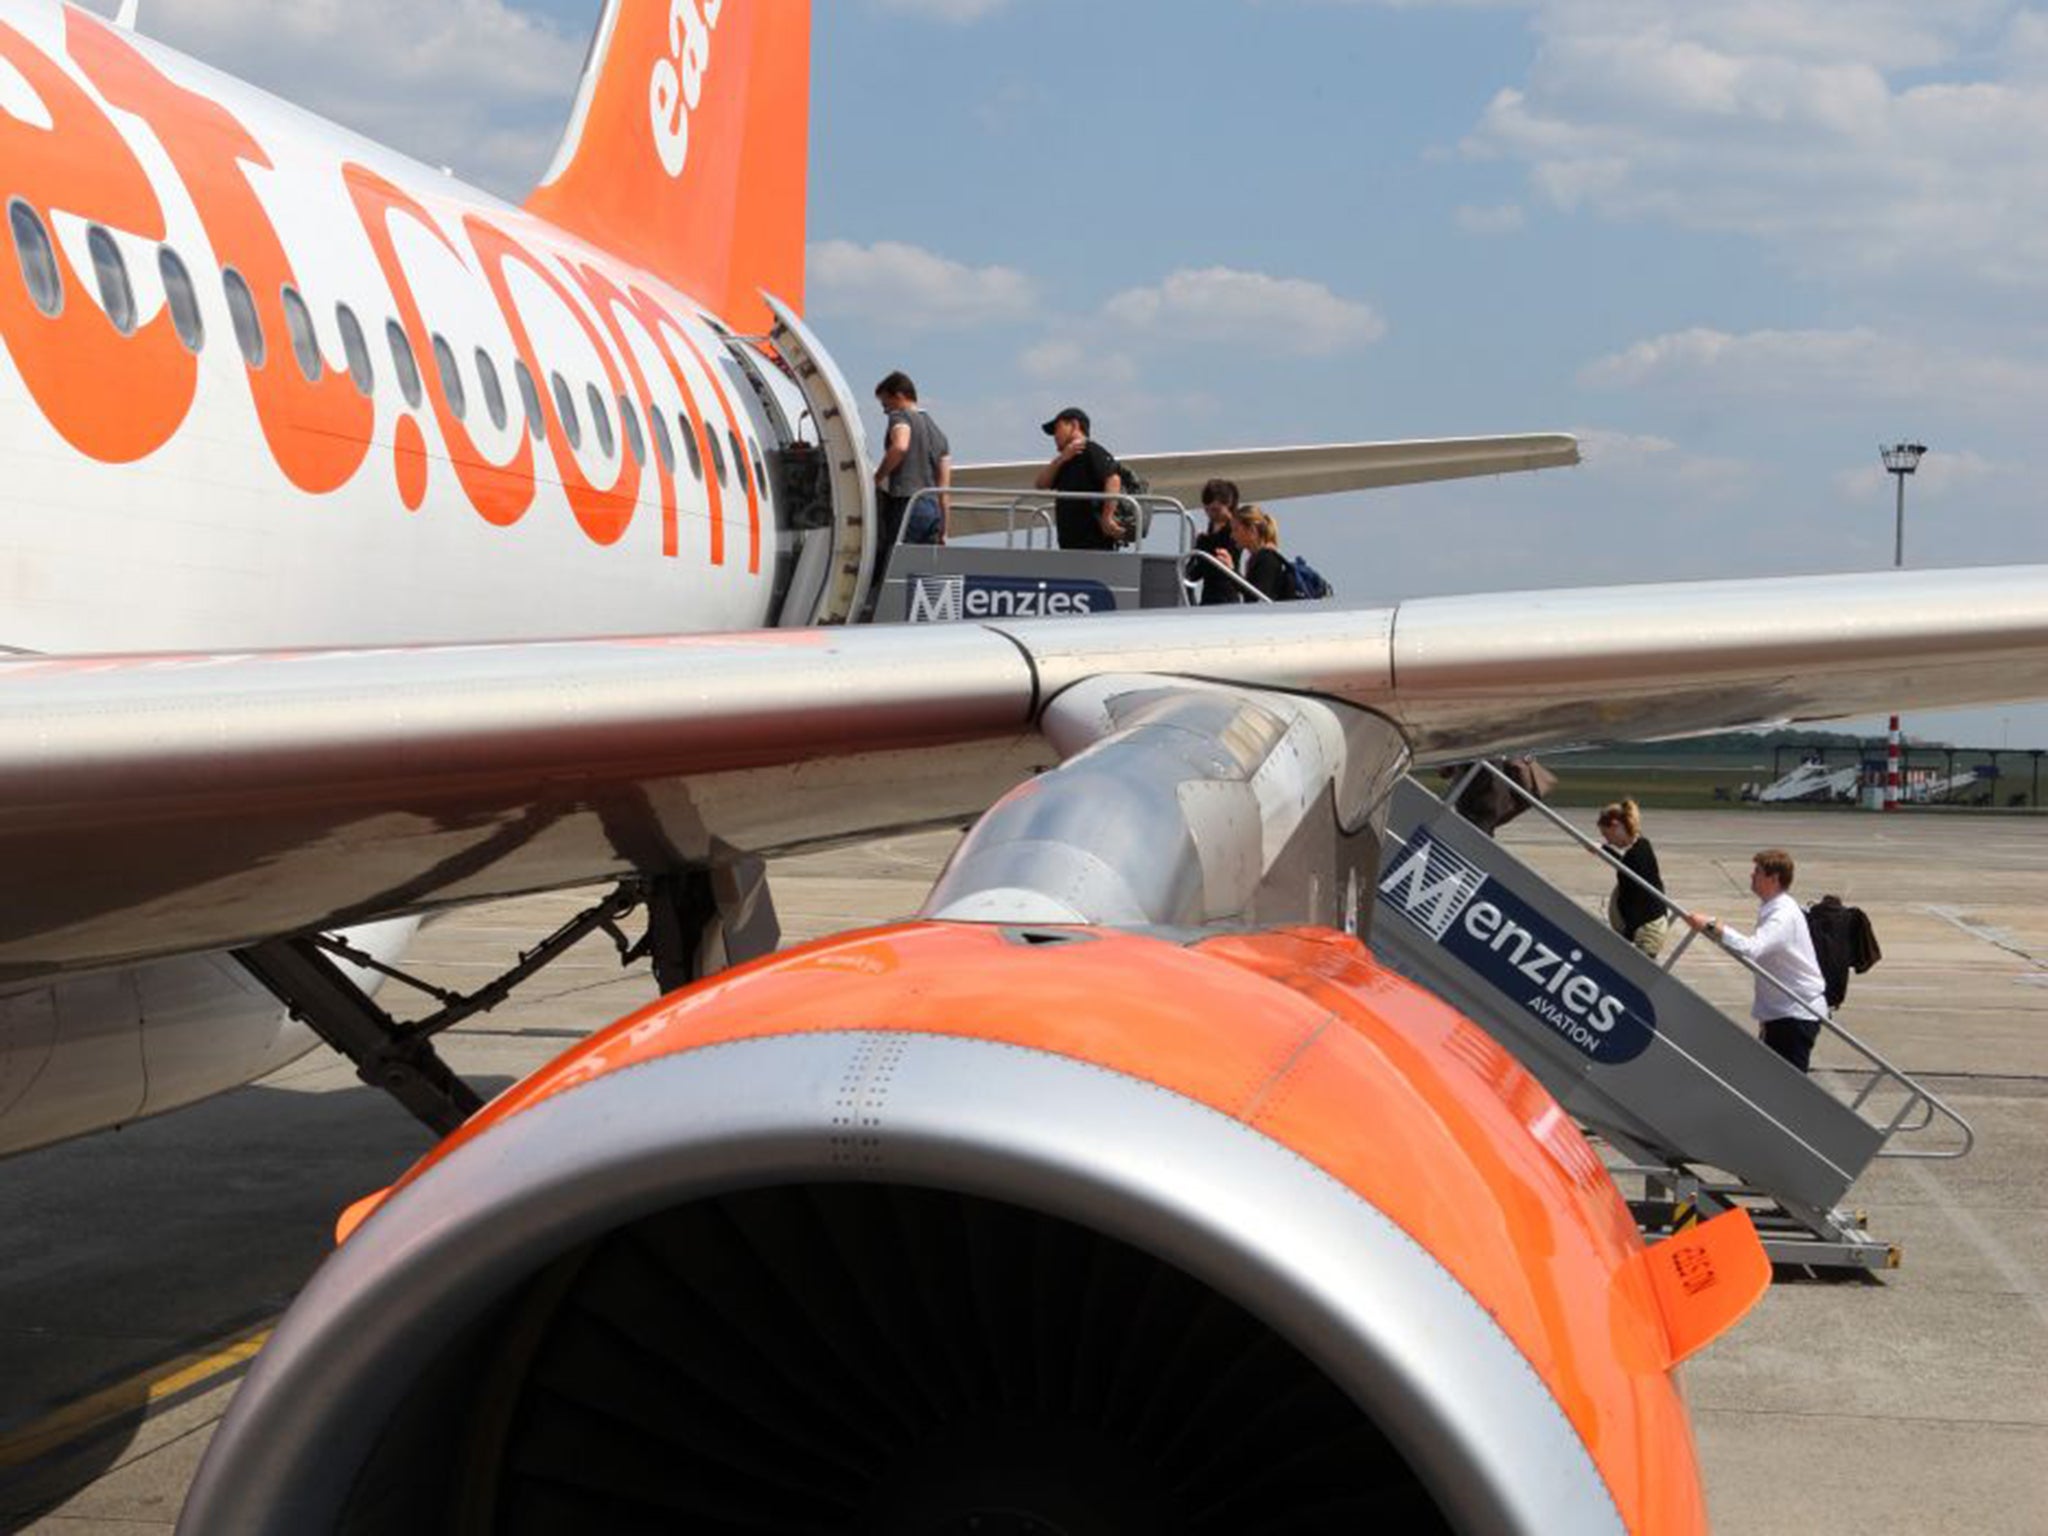 British low-cost airline easyJet raised its full-year profit forecast by around 7 per cent today after record passenger numbers in August helped to offset the higher costs the group has faced this year.